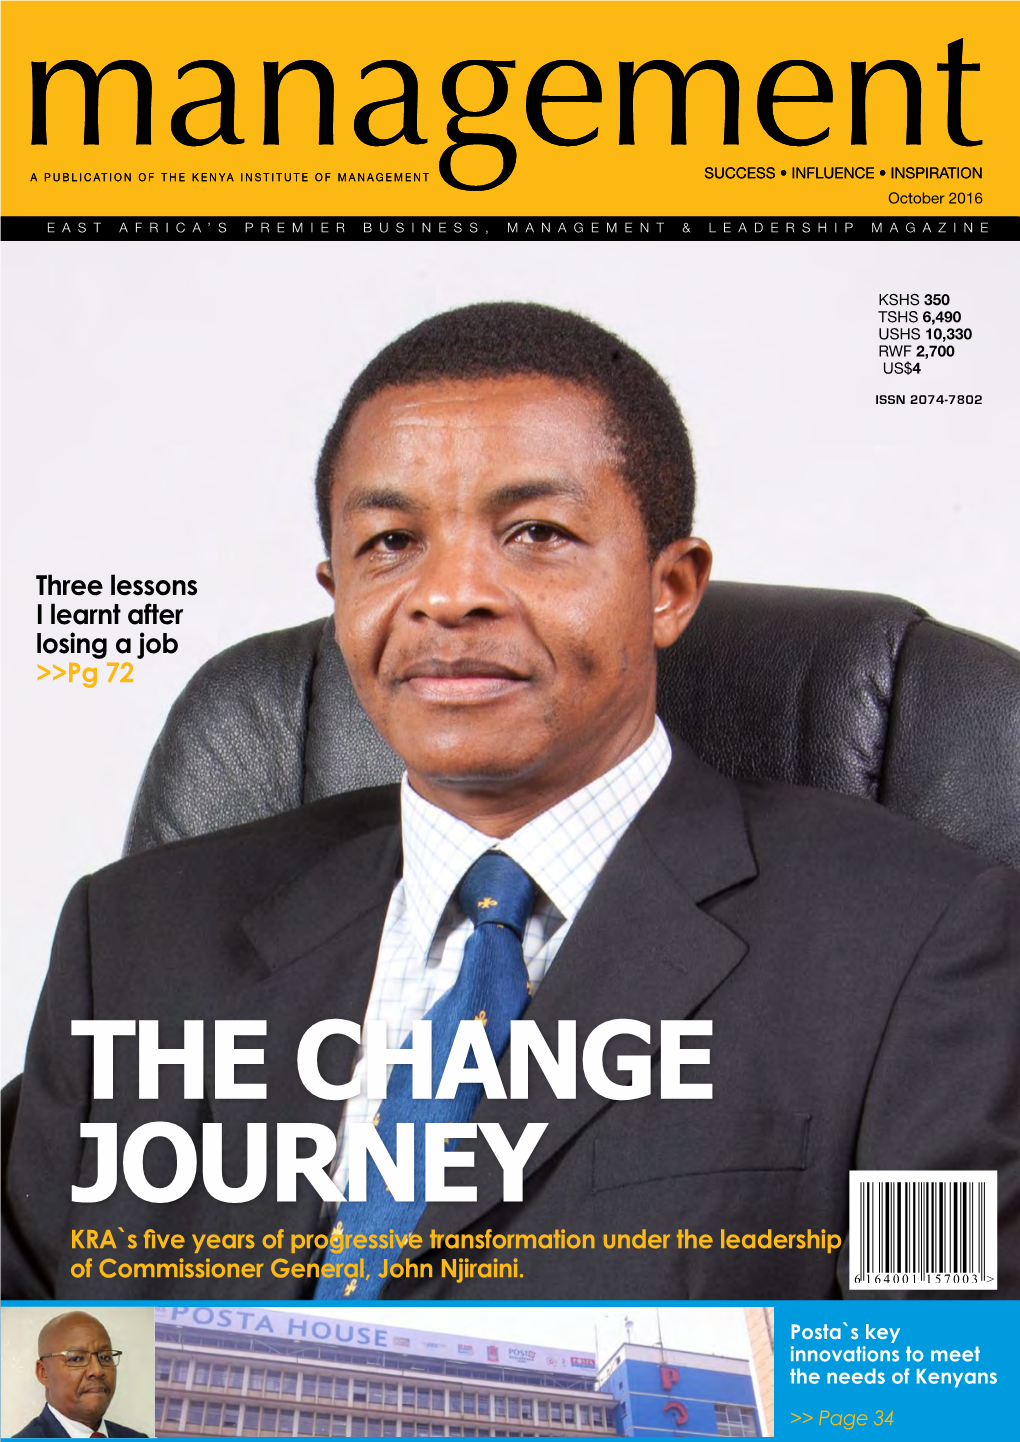 THE CHANGE JOURNEY KRA`S Five Years of Progressive Transformation Under the Leadership